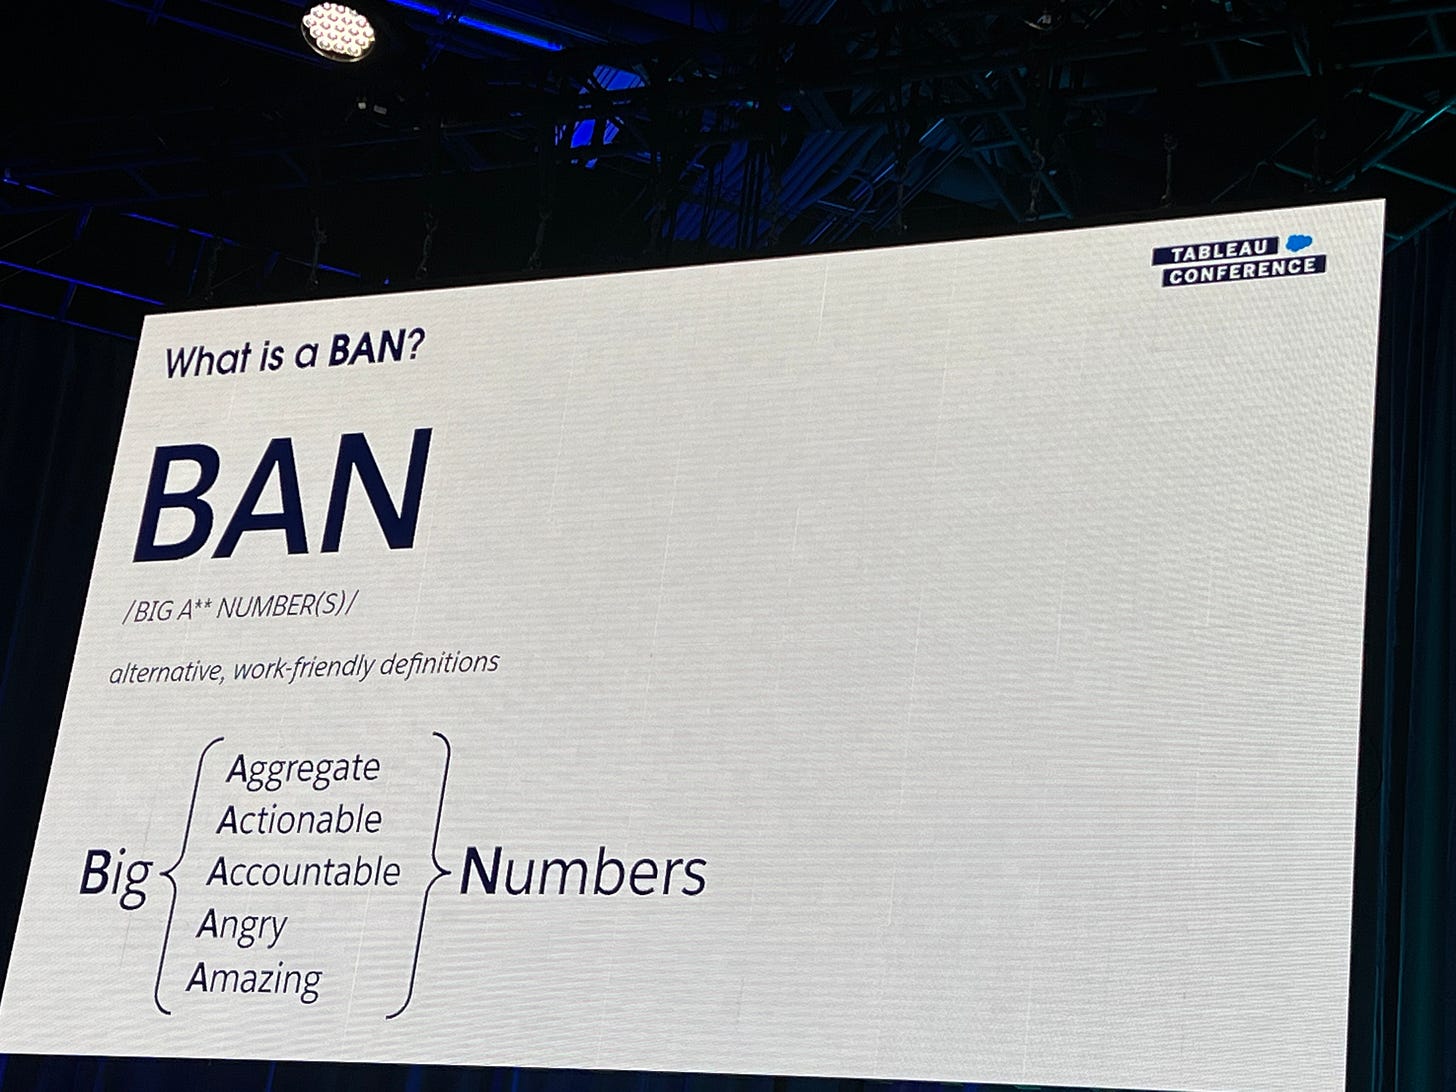 Presentation slide with a white background and black text. The title of the slide says, “What is a BAN?” with several possible definitions, including Big Aggregate Numbers, Big Actionable Numbers, Big Accountable Numbers, Big Angry Numbers, and Big Amazing Numbers.